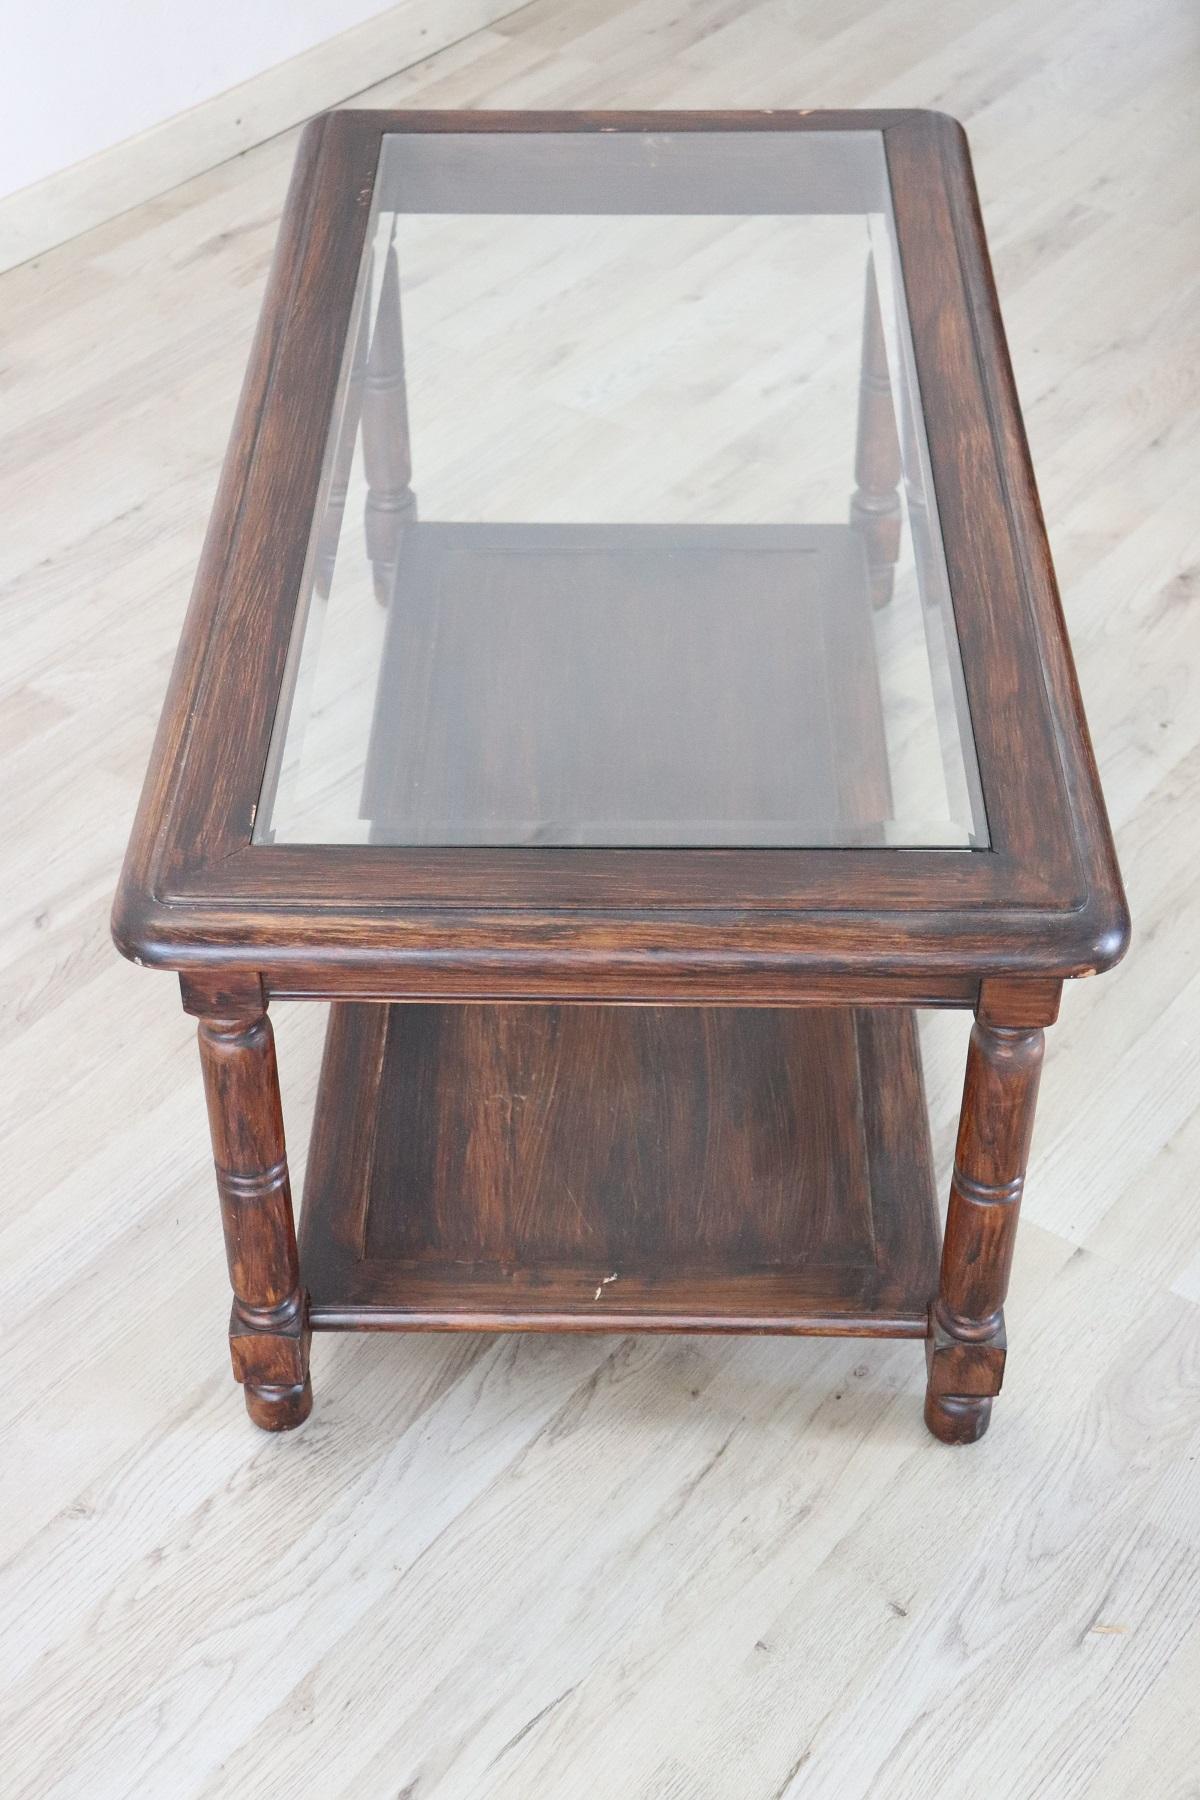 Rare and fine quality 1950s rectangular sofa table or coffee table. The table in precious poplar wood with four turned legs. The top is in glass. Perfect condition ready to be placed in your beautiful home.